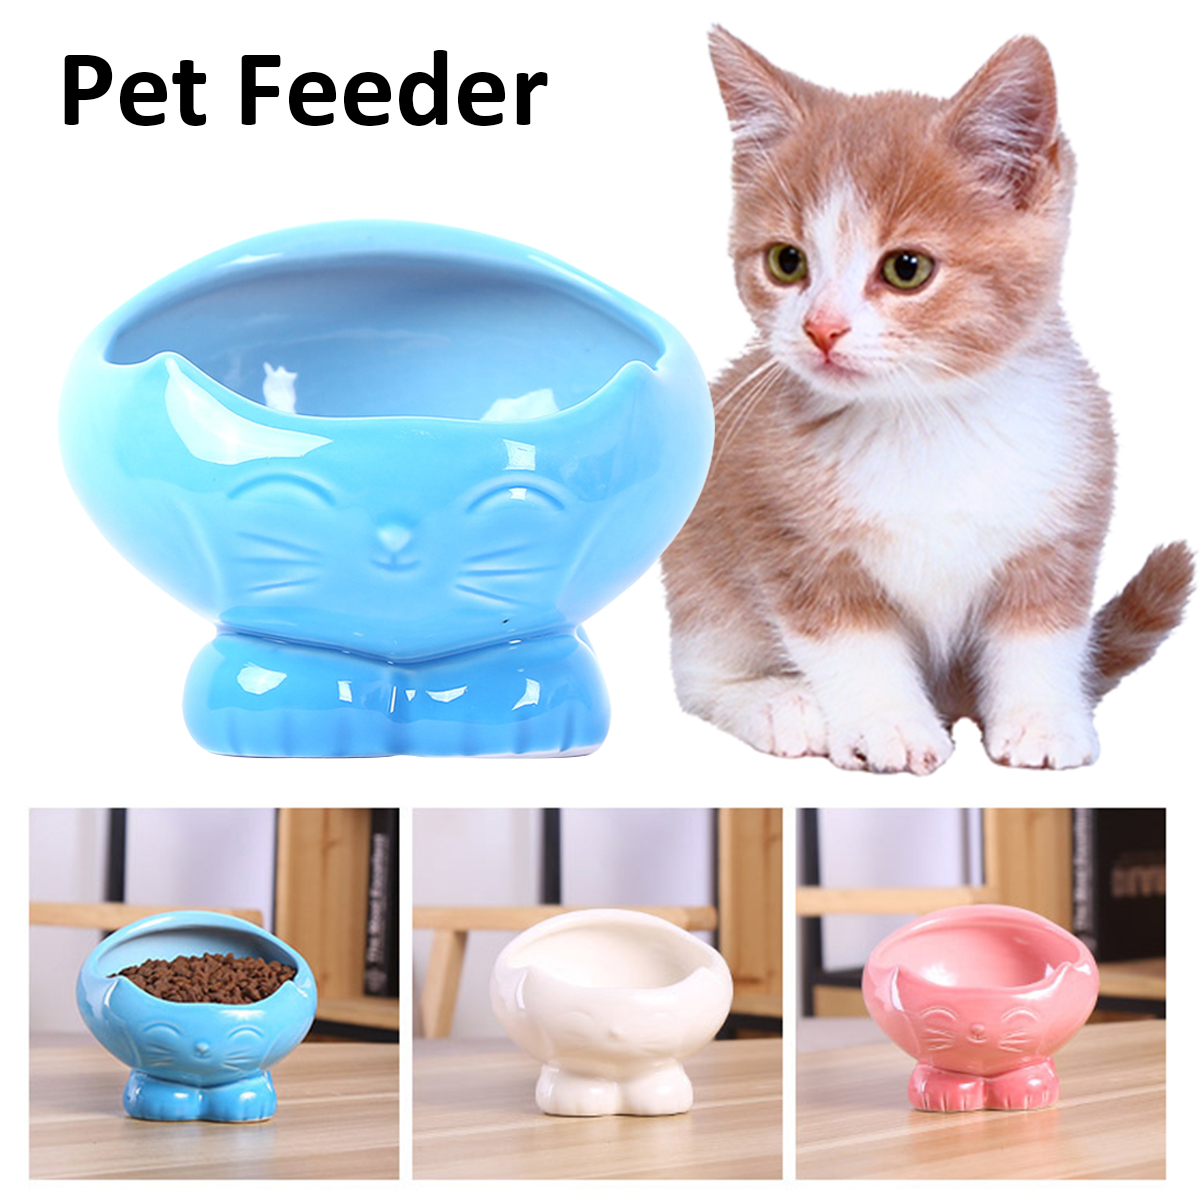 Cats-Feeding-Pet-Bowl-Food-Ceramic-Bowl-Puppy-Dogs-Snack-Water-Feeder-1691894-2